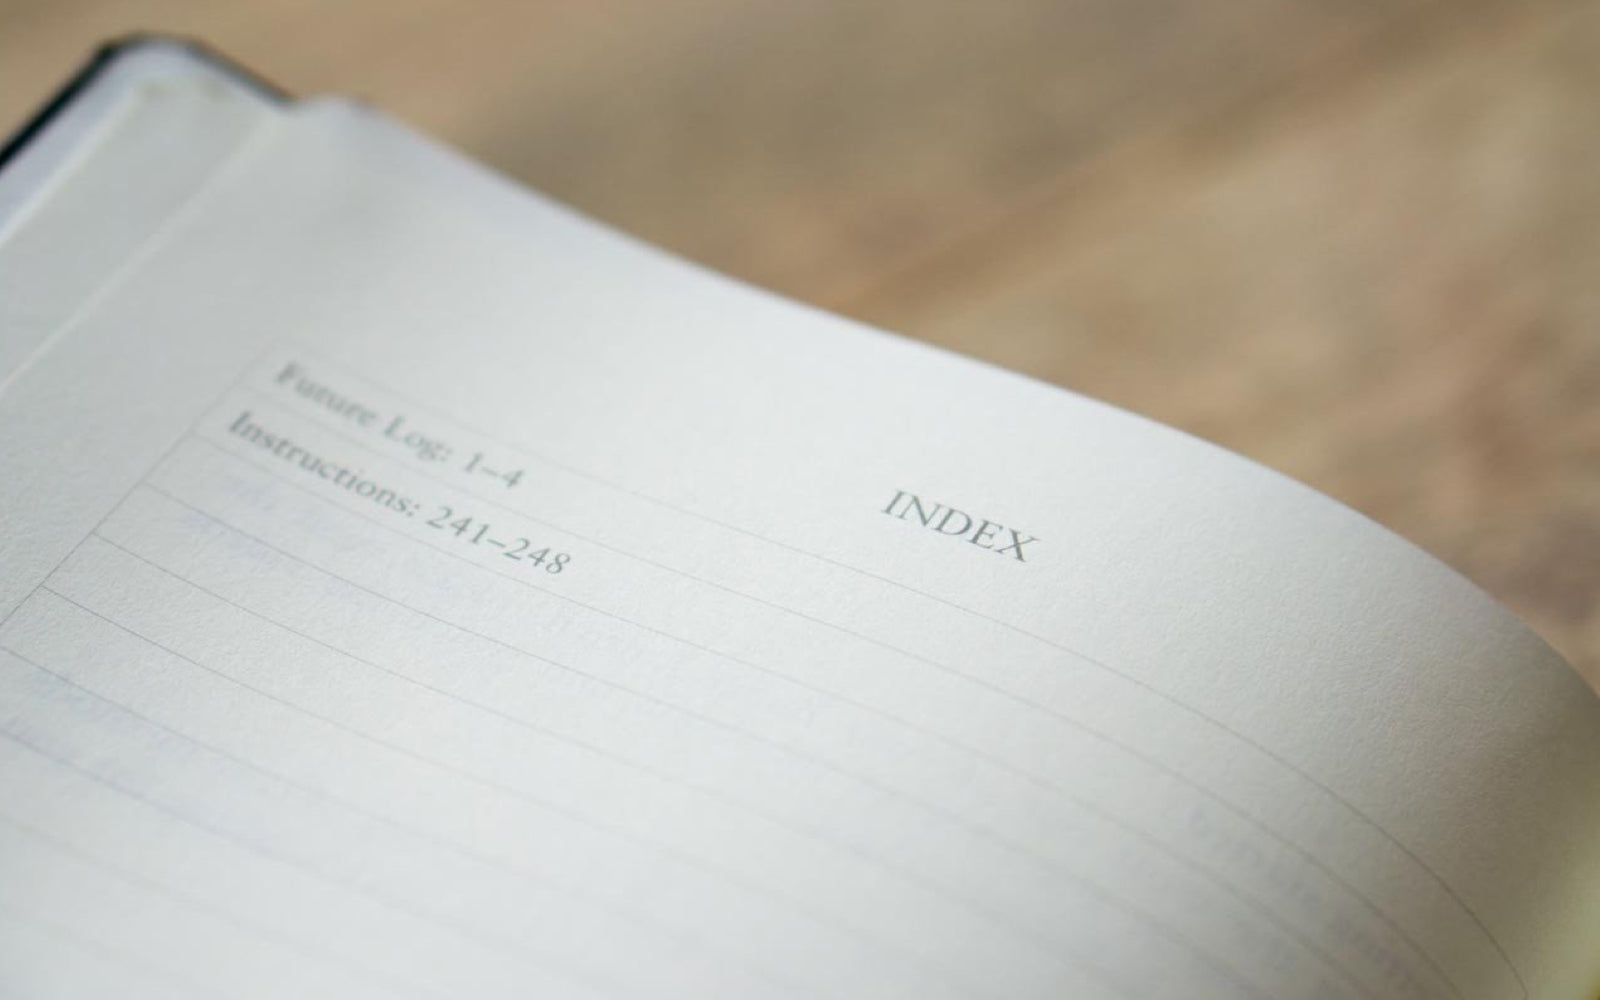 The Basics of Bullet Journal Indexes and Ways to Modify It